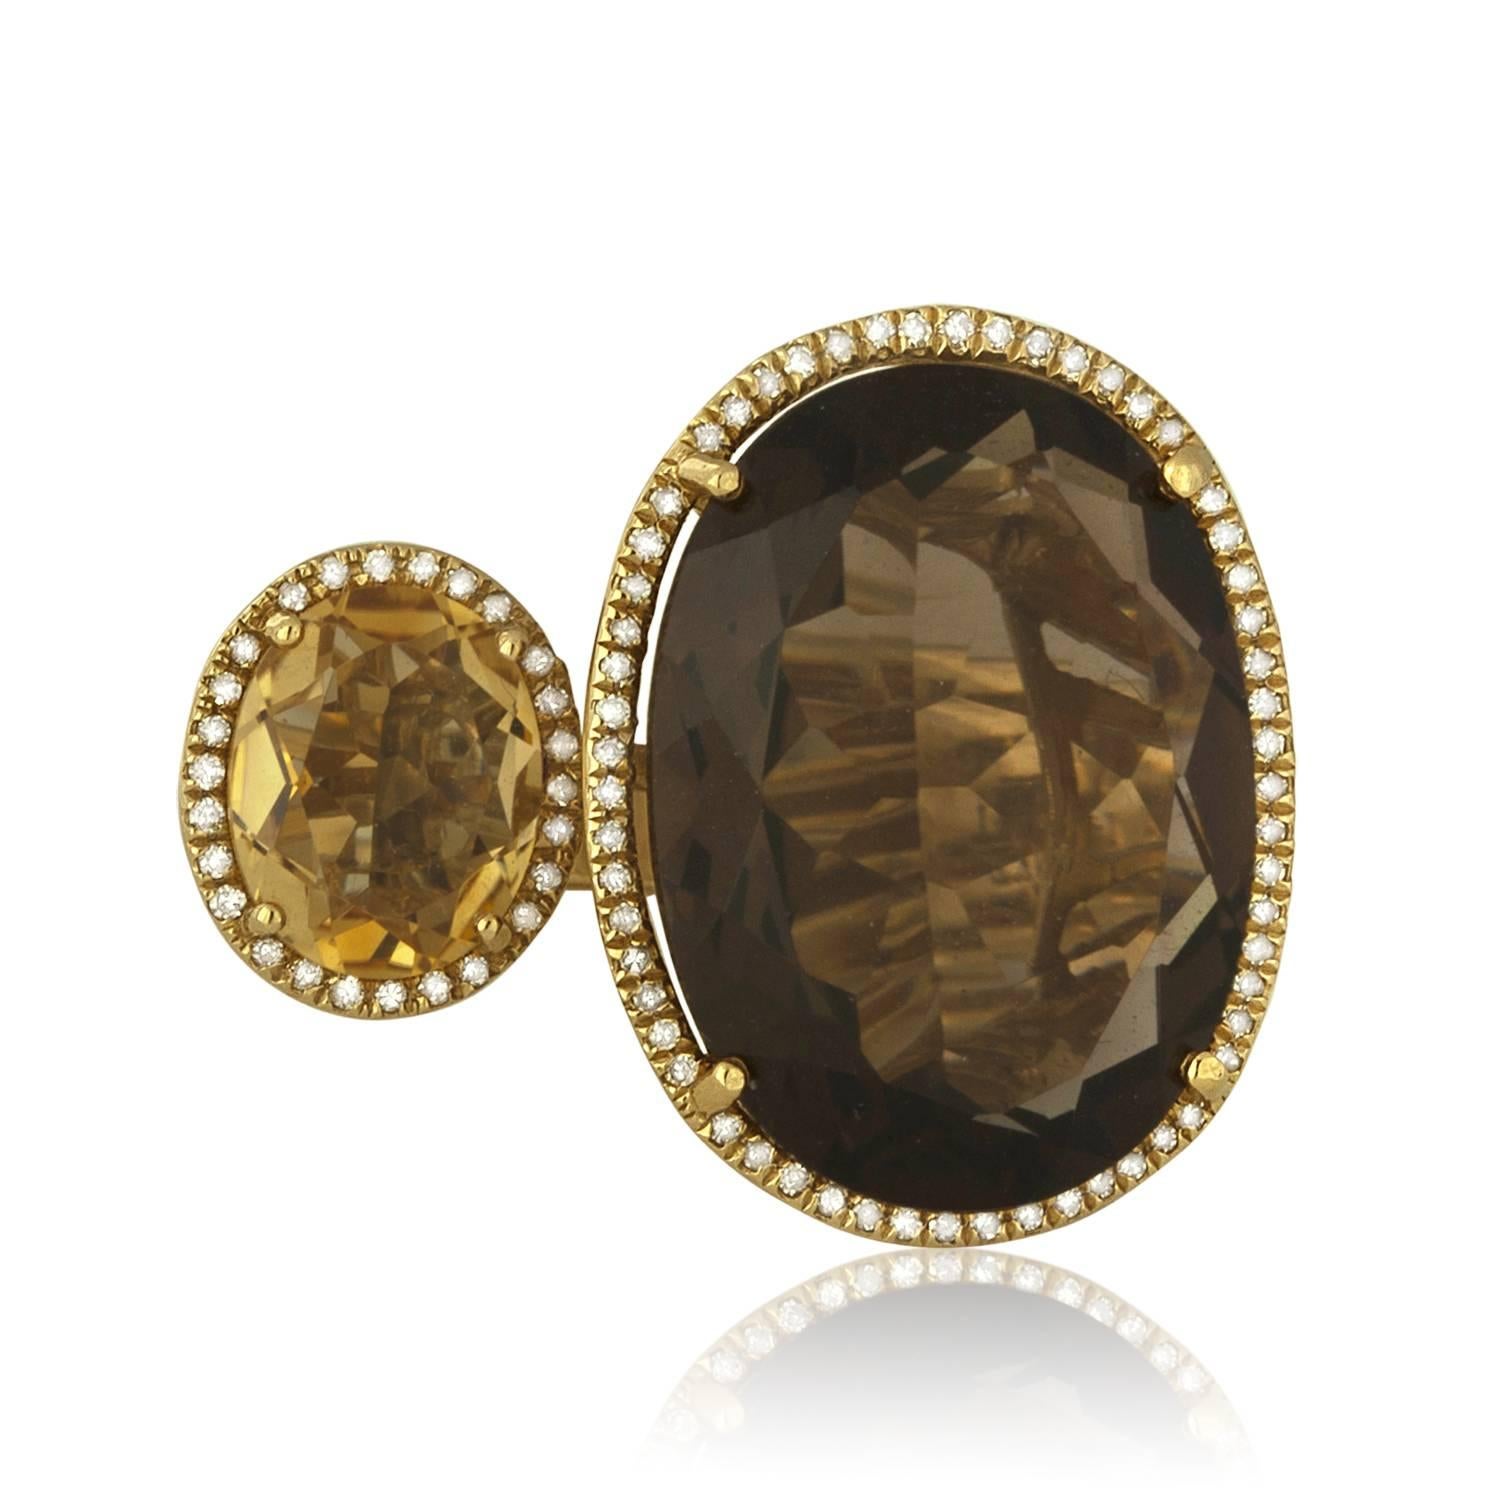 The stones are set in 14K Yellow Gold
The ring has a large Smoky Quartz 17.60ct 
It also has a Citrine 2.15ct.
These beautiful stones are surrounded by diamonds 0.26ct.
The ring is a size 6.75
The ring weighs 10.8 grams